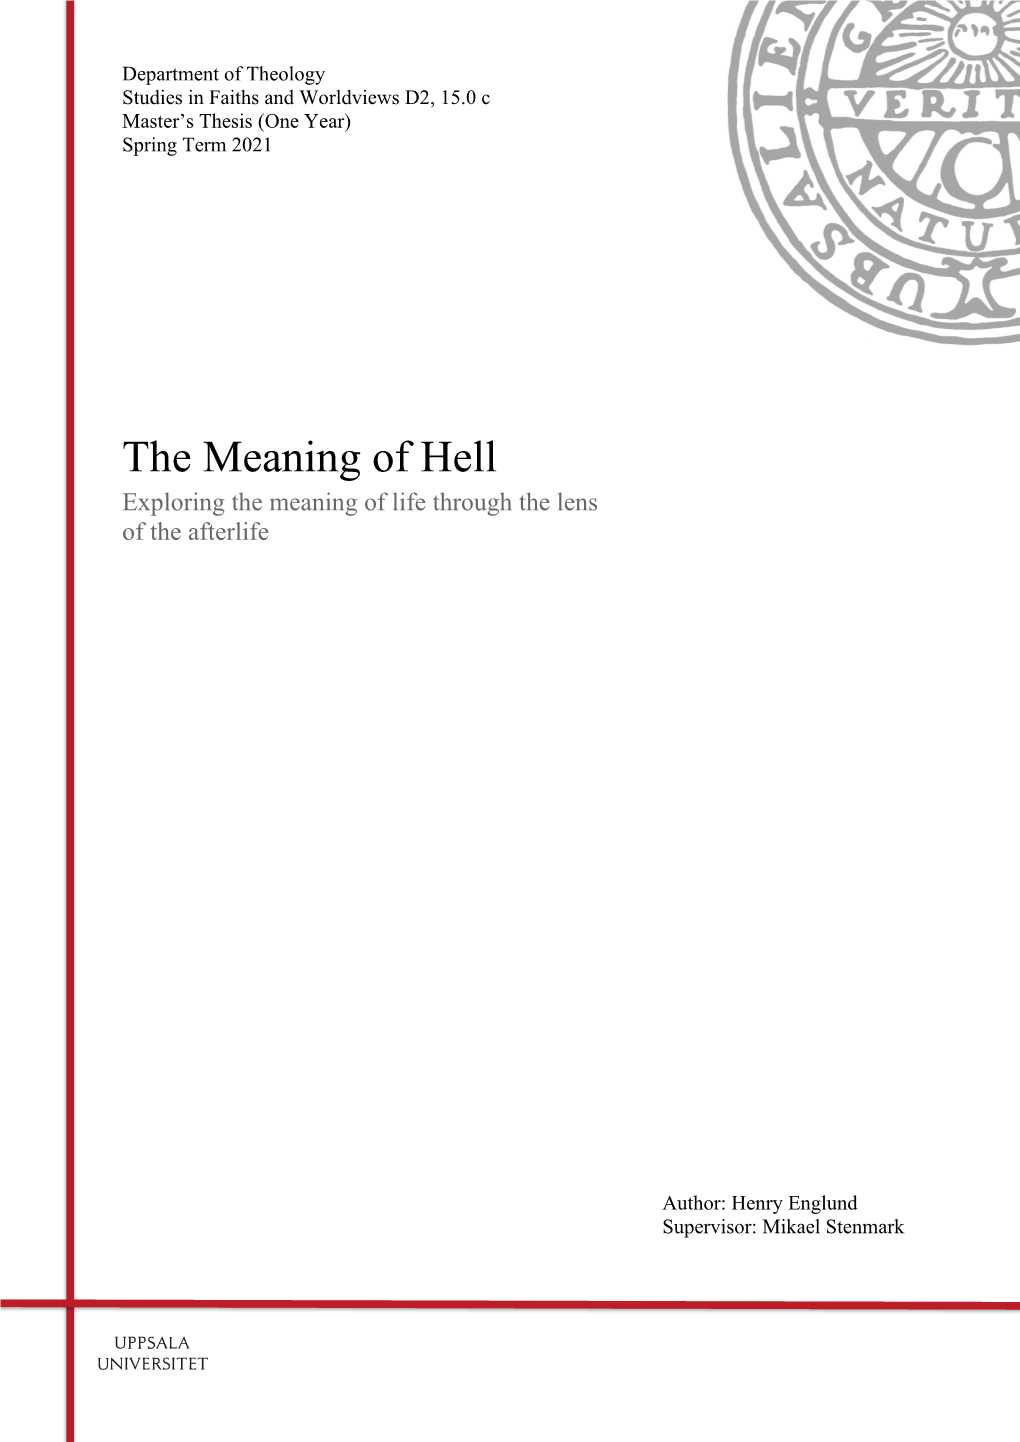 The Meaning of Hell Exploring the Meaning of Life Through the Lens of the Afterlife